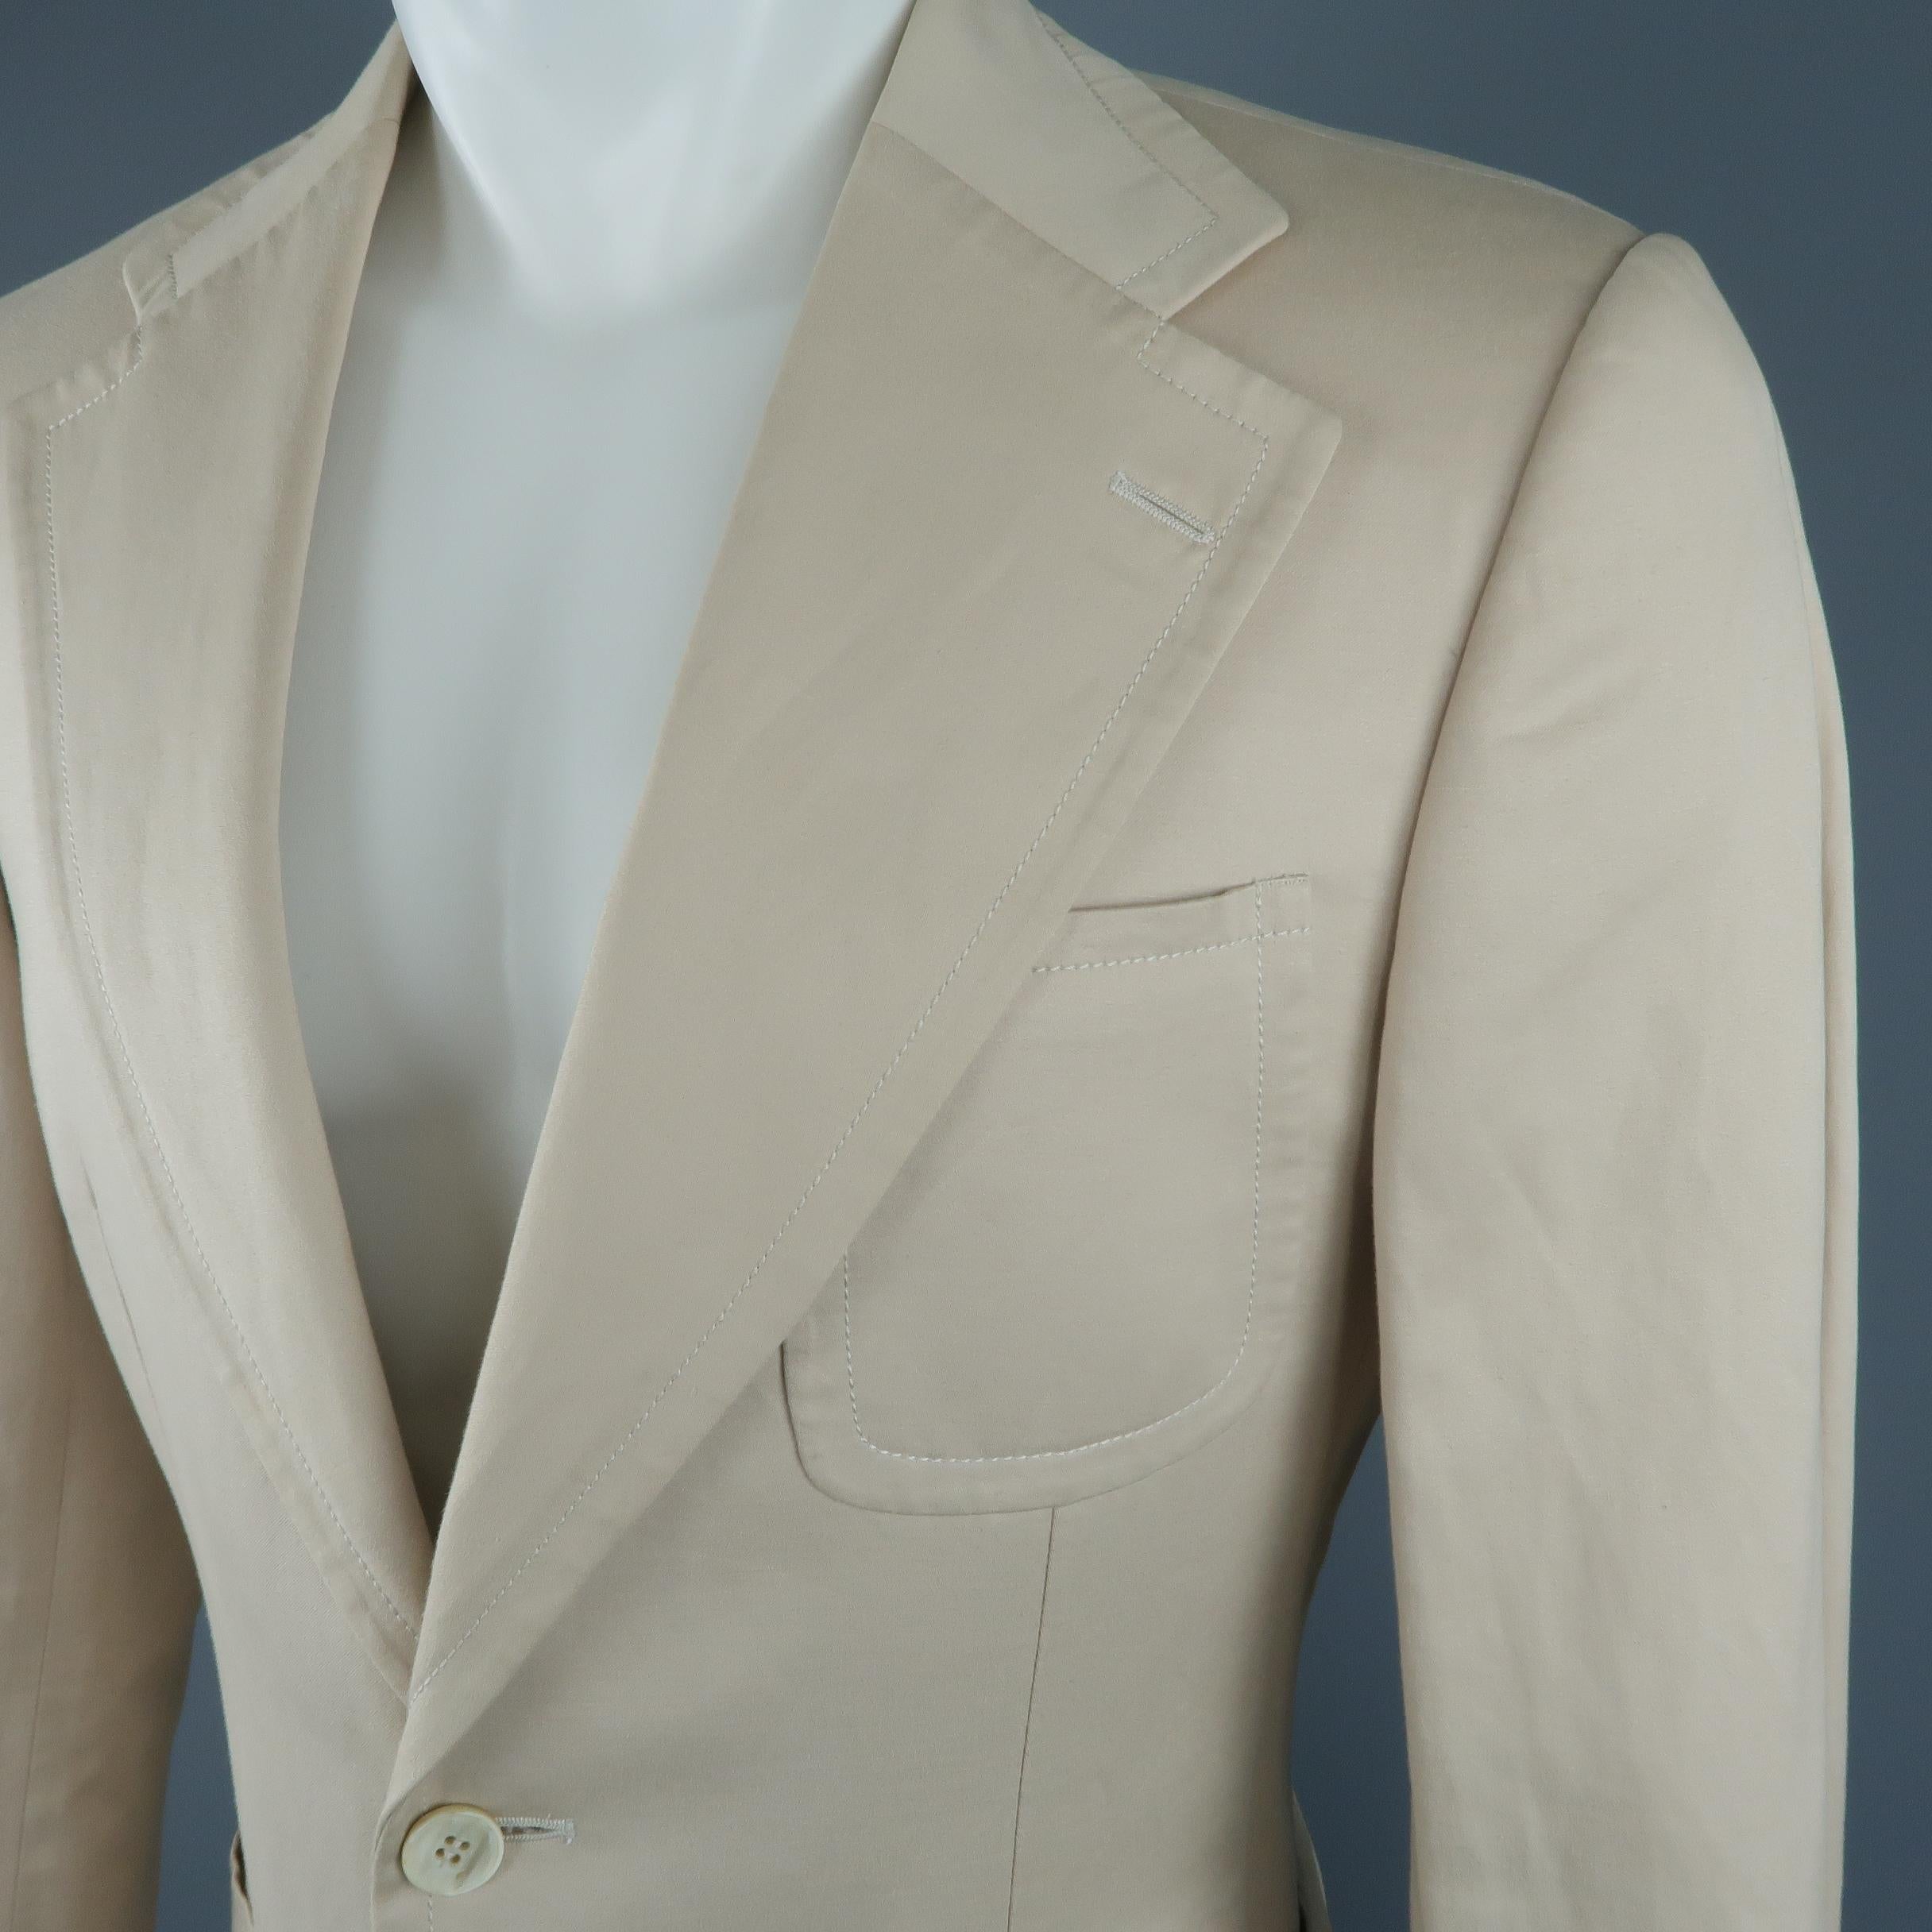 Archive GUCCI by TOM FORD sing breasted sport coat comes in a khaki beige linen cotton blend fabric with a wide notch lapel, two button front, and triple patch pockets. Wear and stains throughout. As-is.
 
Fair Pre-Owned Condition.
Marked: IT 48
